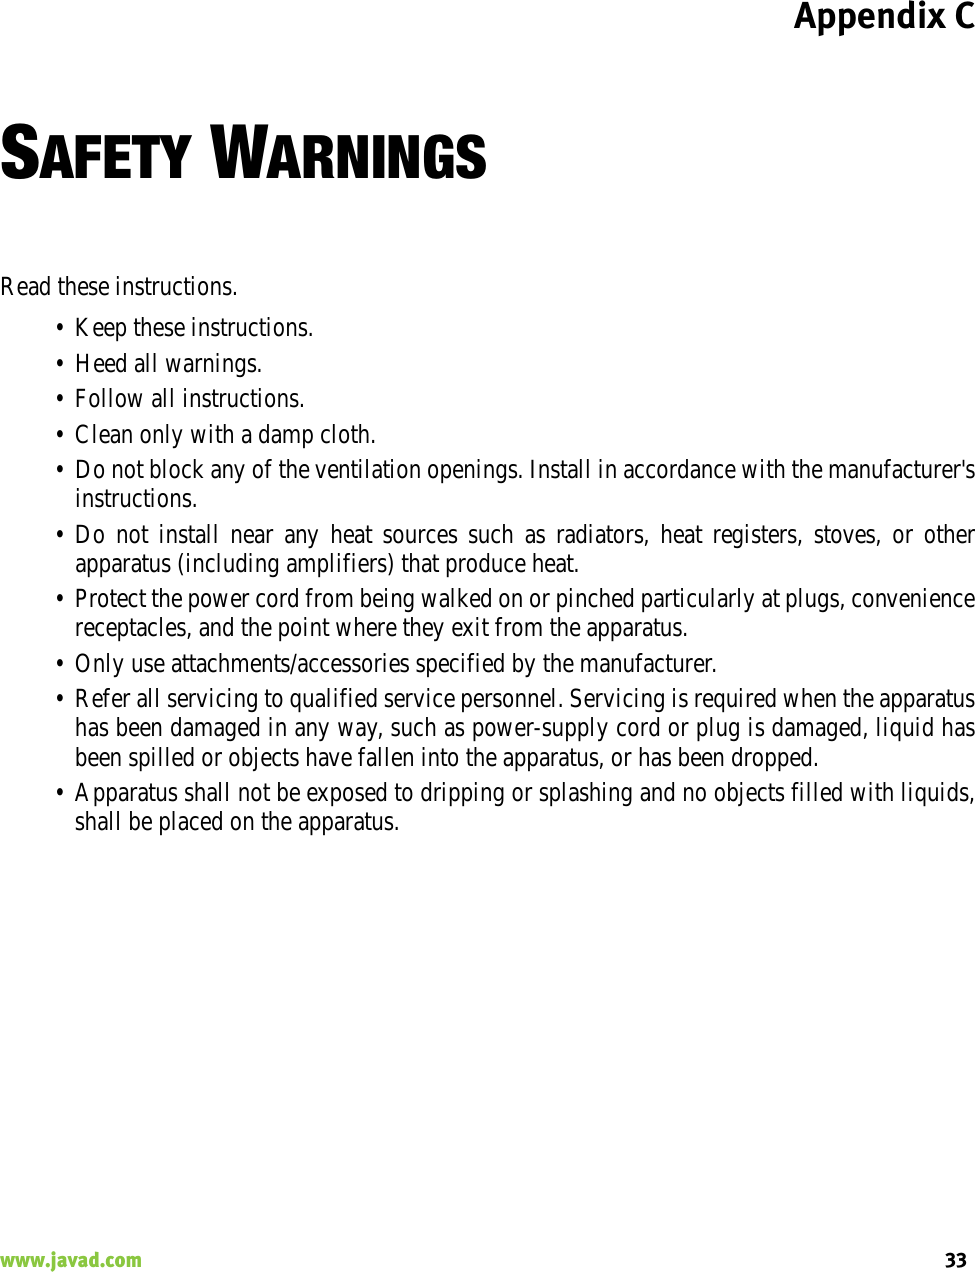 Appendix C33www.javad.com                                                                                                                                                    SAFETY WARNINGSRead these instructions.• Keep these instructions.• Heed all warnings.• Follow all instructions.• Clean only with a damp cloth.• Do not block any of the ventilation openings. Install in accordance with the manufacturer&apos;sinstructions.• Do not install near any heat sources such as radiators, heat registers, stoves, or otherapparatus (including amplifiers) that produce heat.• Protect the power cord from being walked on or pinched particularly at plugs, conveniencereceptacles, and the point where they exit from the apparatus.• Only use attachments/accessories specified by the manufacturer.• Refer all servicing to qualified service personnel. Servicing is required when the apparatushas been damaged in any way, such as power-supply cord or plug is damaged, liquid hasbeen spilled or objects have fallen into the apparatus, or has been dropped.• Apparatus shall not be exposed to dripping or splashing and no objects filled with liquids,shall be placed on the apparatus.